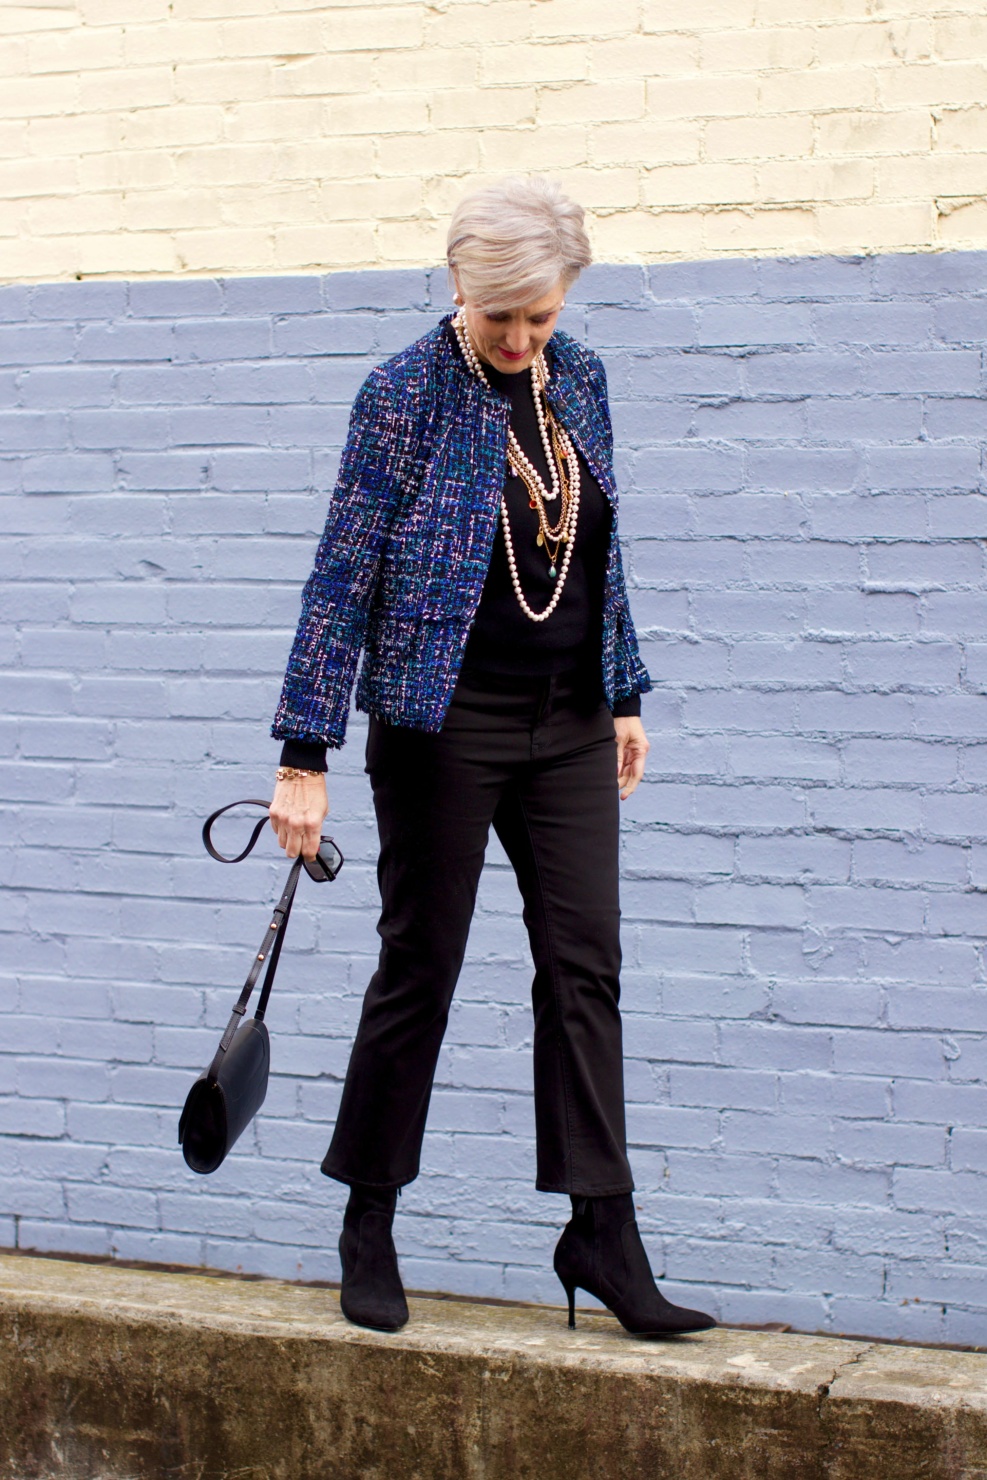 beth at Style at a Certain Age wears an Ann Taylor tweed military jacket, Everlane crewneck cashmere, J.Crew cropped flare denim, pointy-toed boots and strings of pearls